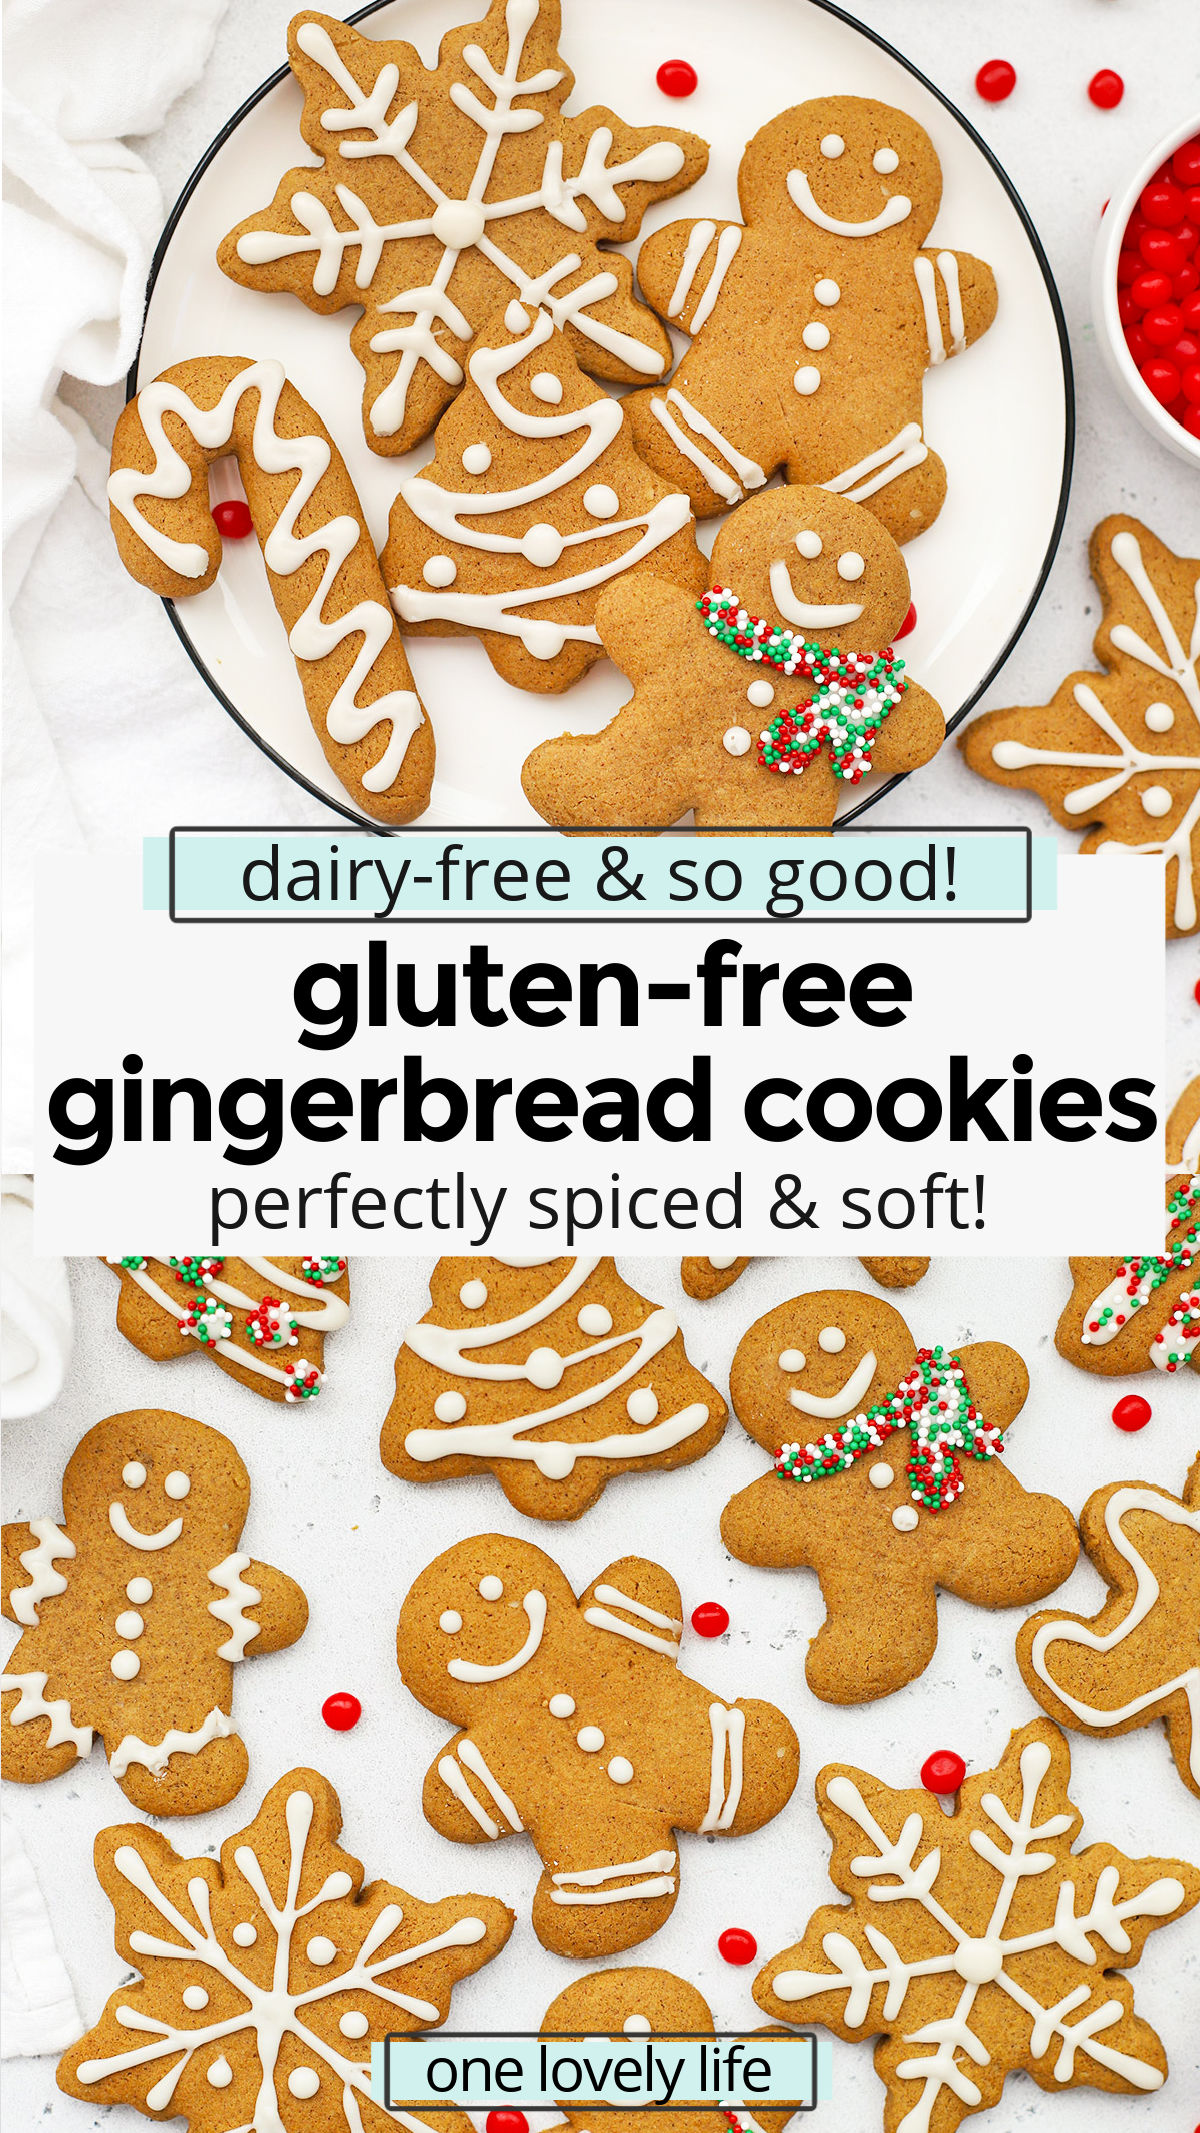 Gluten-Free Gingerbread Cookies - These soft gluten-free gingerbread cookies are the perfect holiday treat. Use this dough to make gluten-free gingerbread men, snowflakes, ornaments, trees, and more! // Gluten Free Holiday Cookies // Gluten Free Christmas Cookies // Gluten Free Gingerbread Recipe / The Best Gluten-Free Gingerbread Cookies